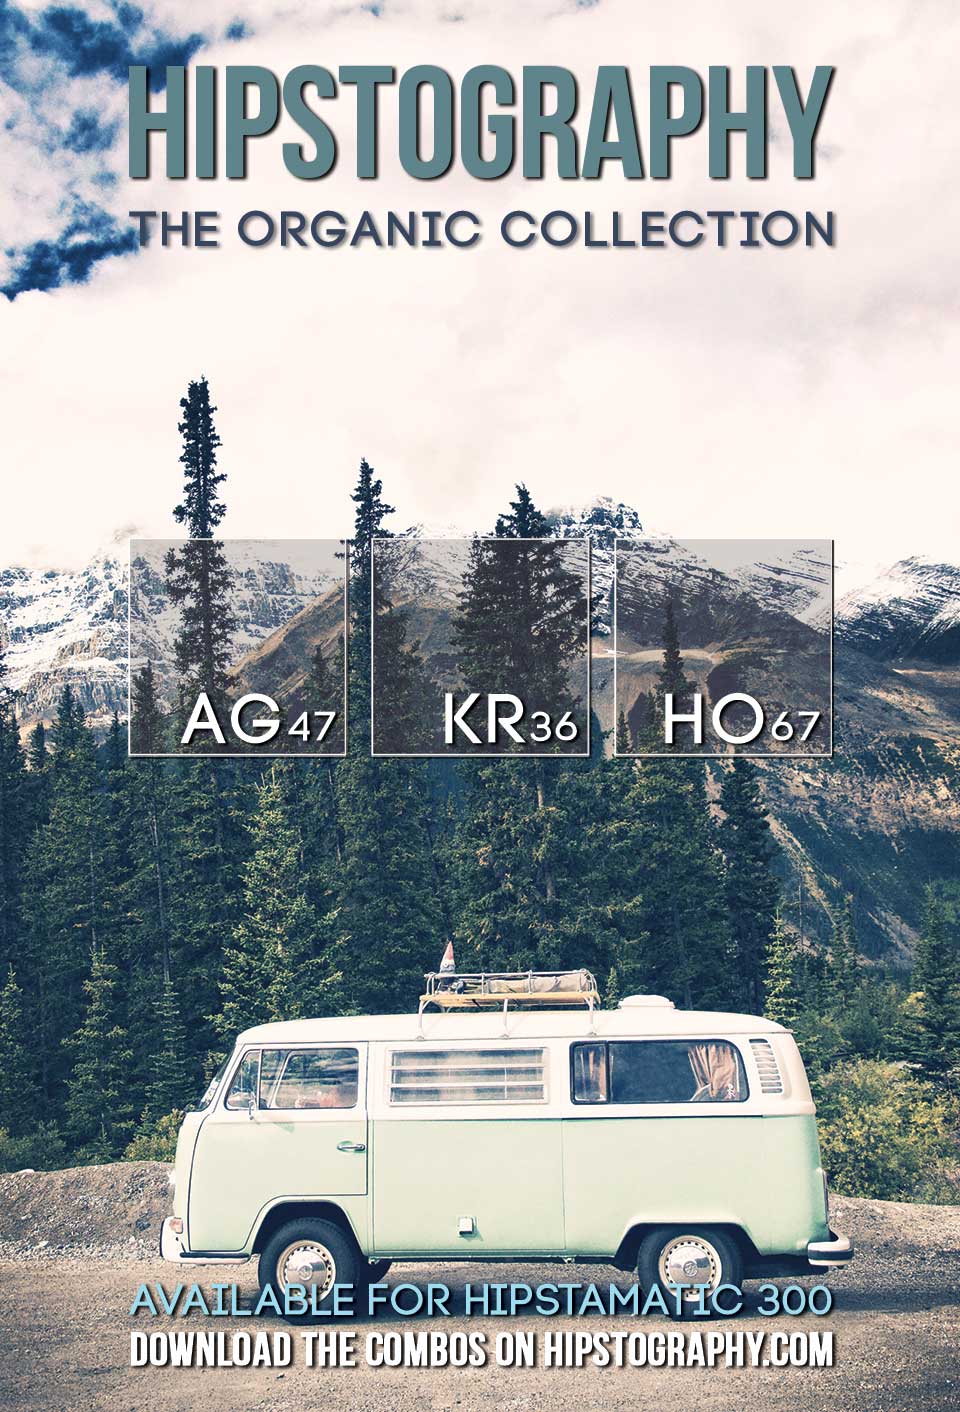 The-Organic-Collection-Poster-OK